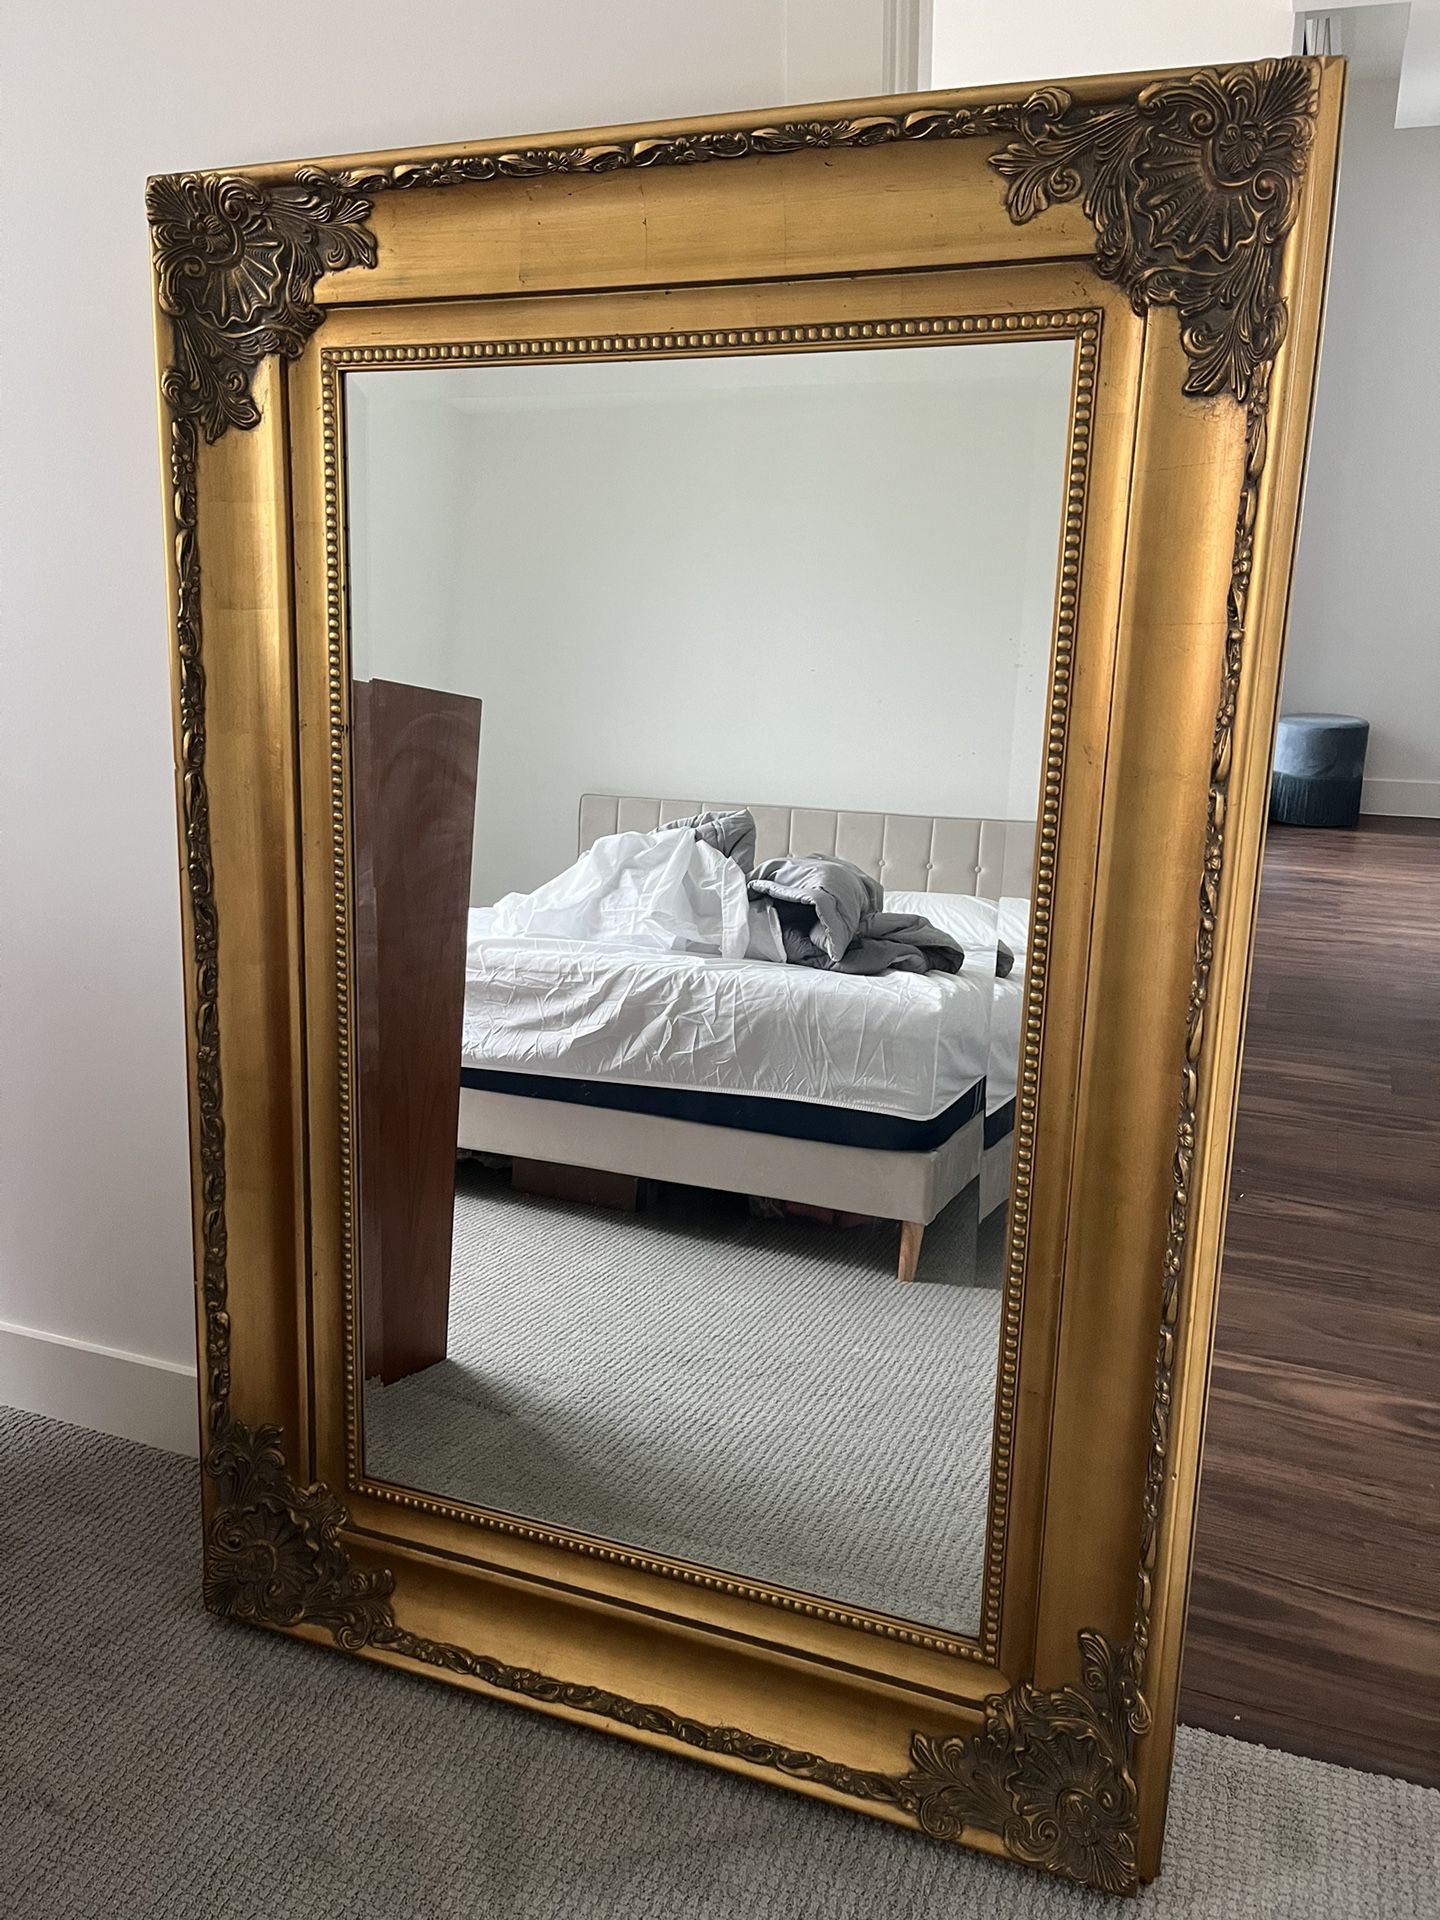 Gilded Gold Ornate Floor Length Mirror - Antique Reproduction